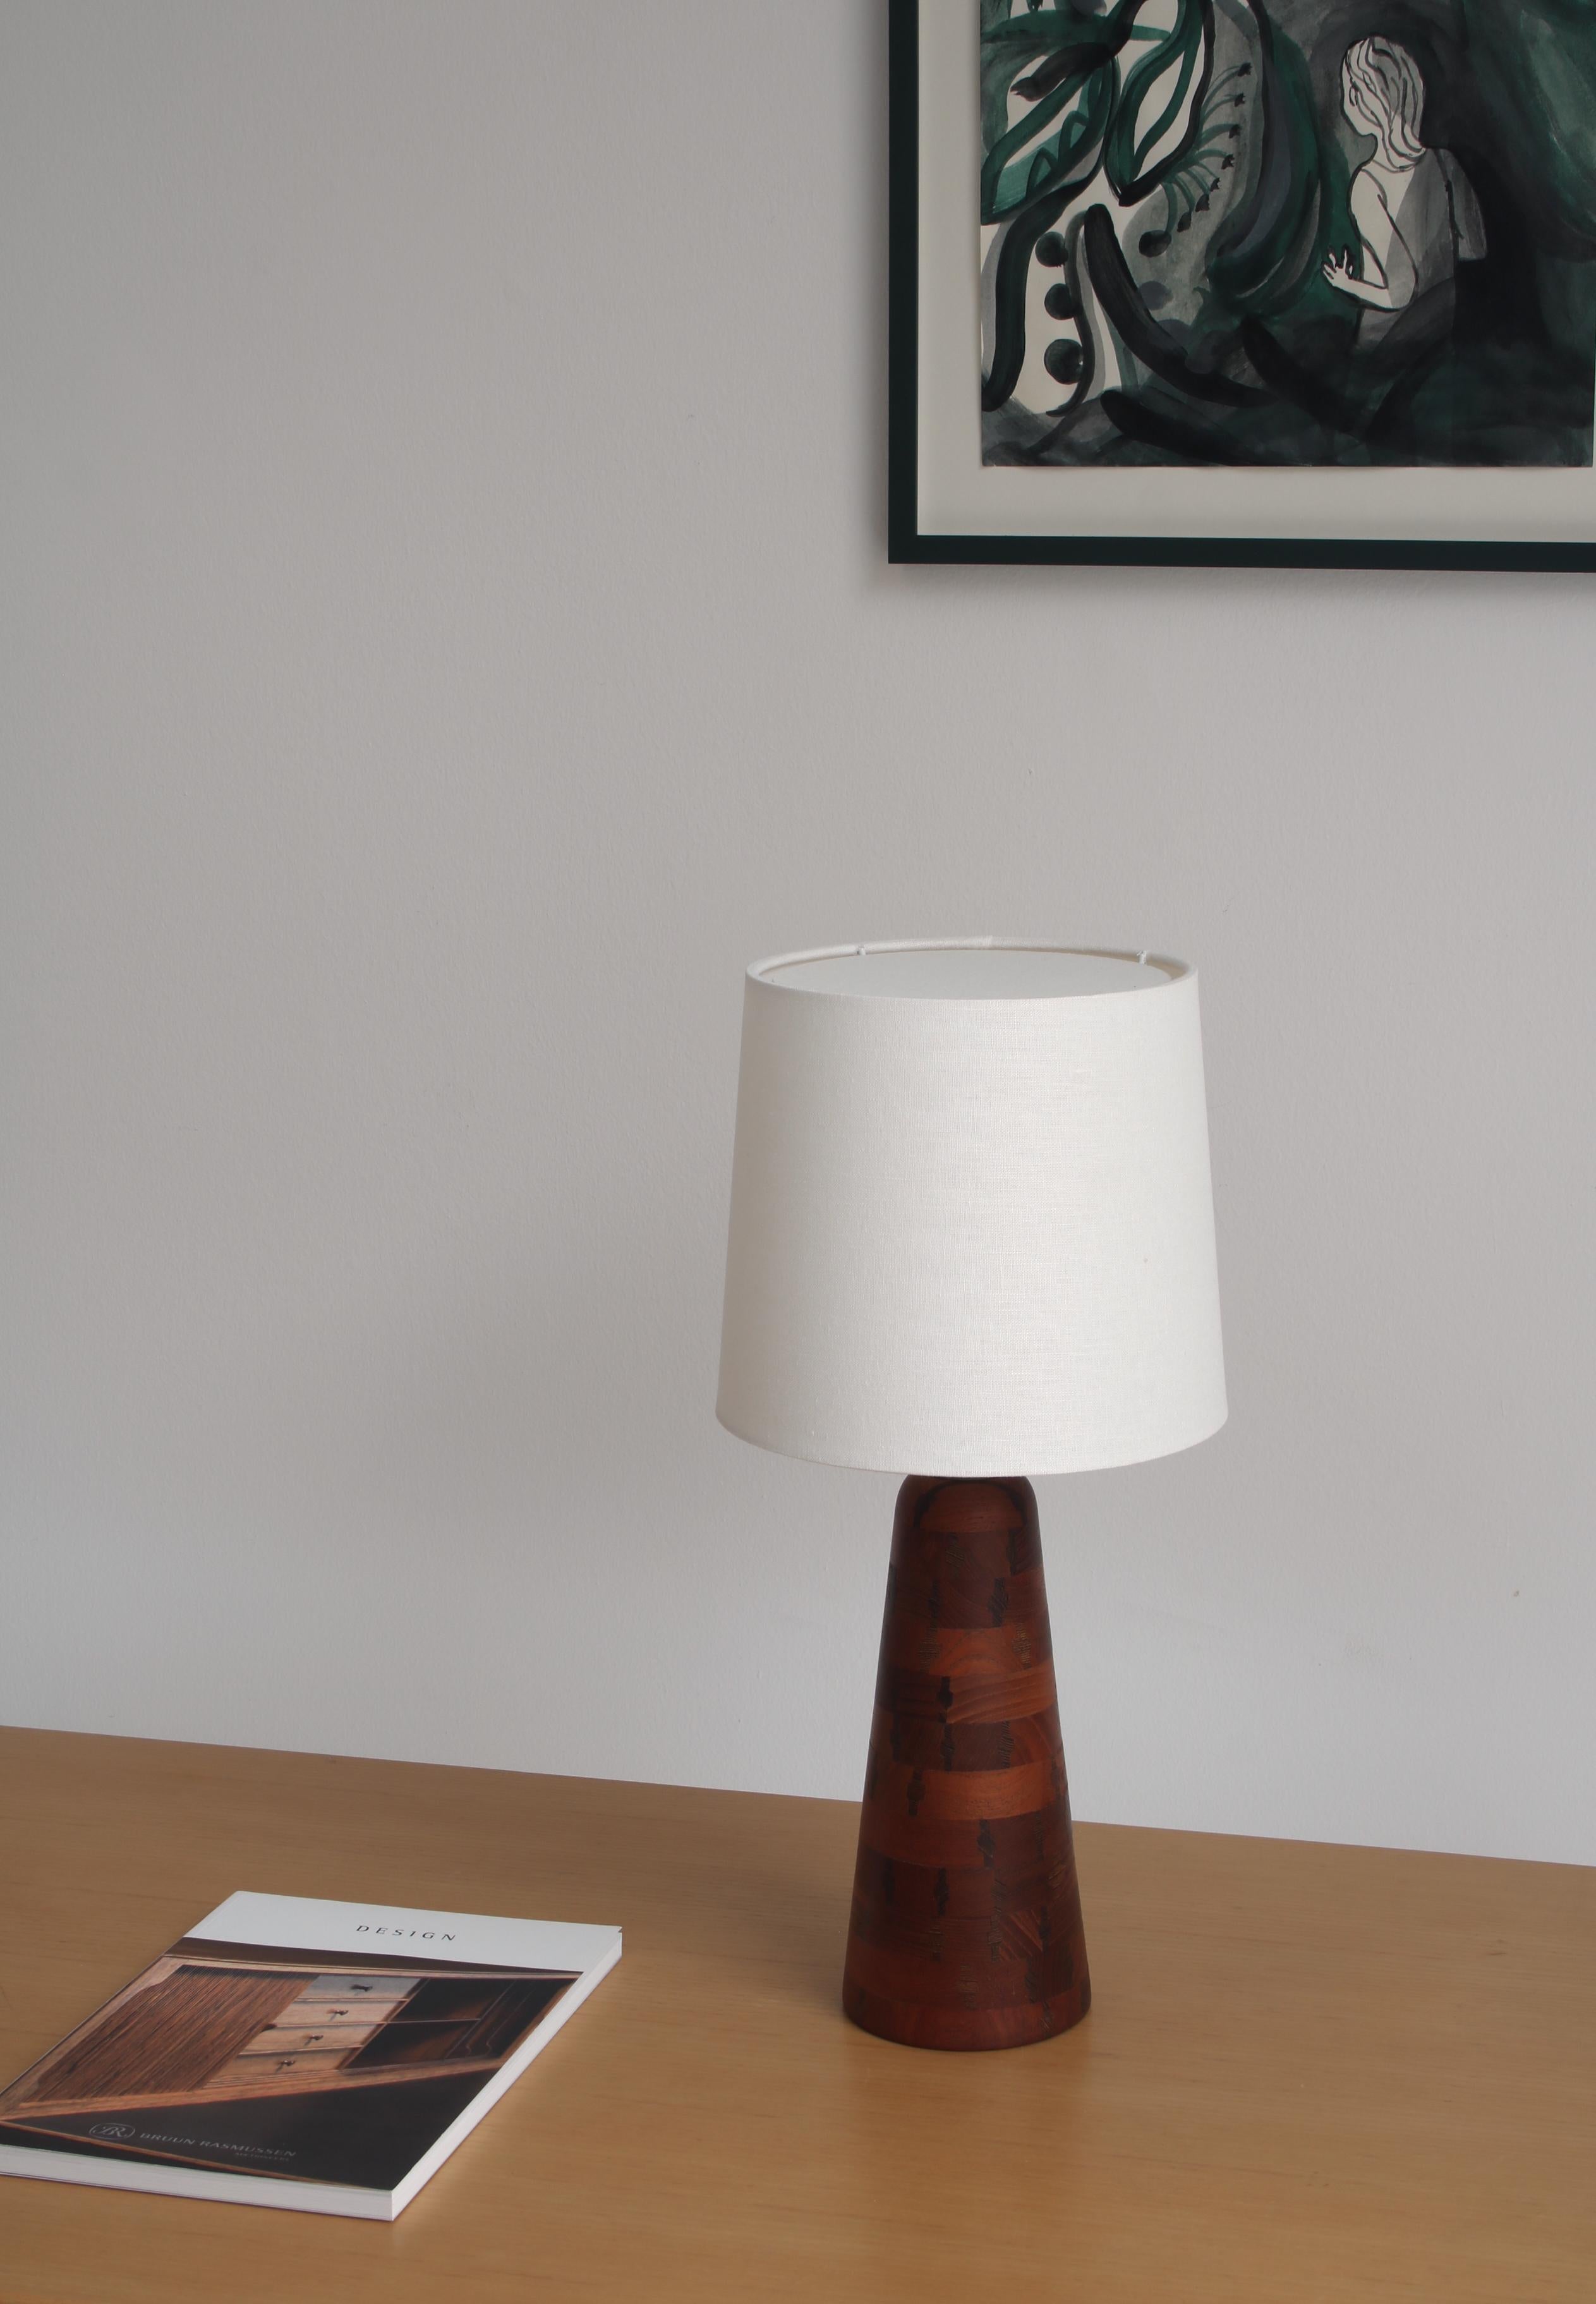 Decorative table lamp in teakwood and brass from the 1960s attributed to Danish designer Lisbeth Brams. The Lamp base is made of single pieces of teakwood connected with visible joints in dark wenge. The lamp has been mounted with a new flax linen